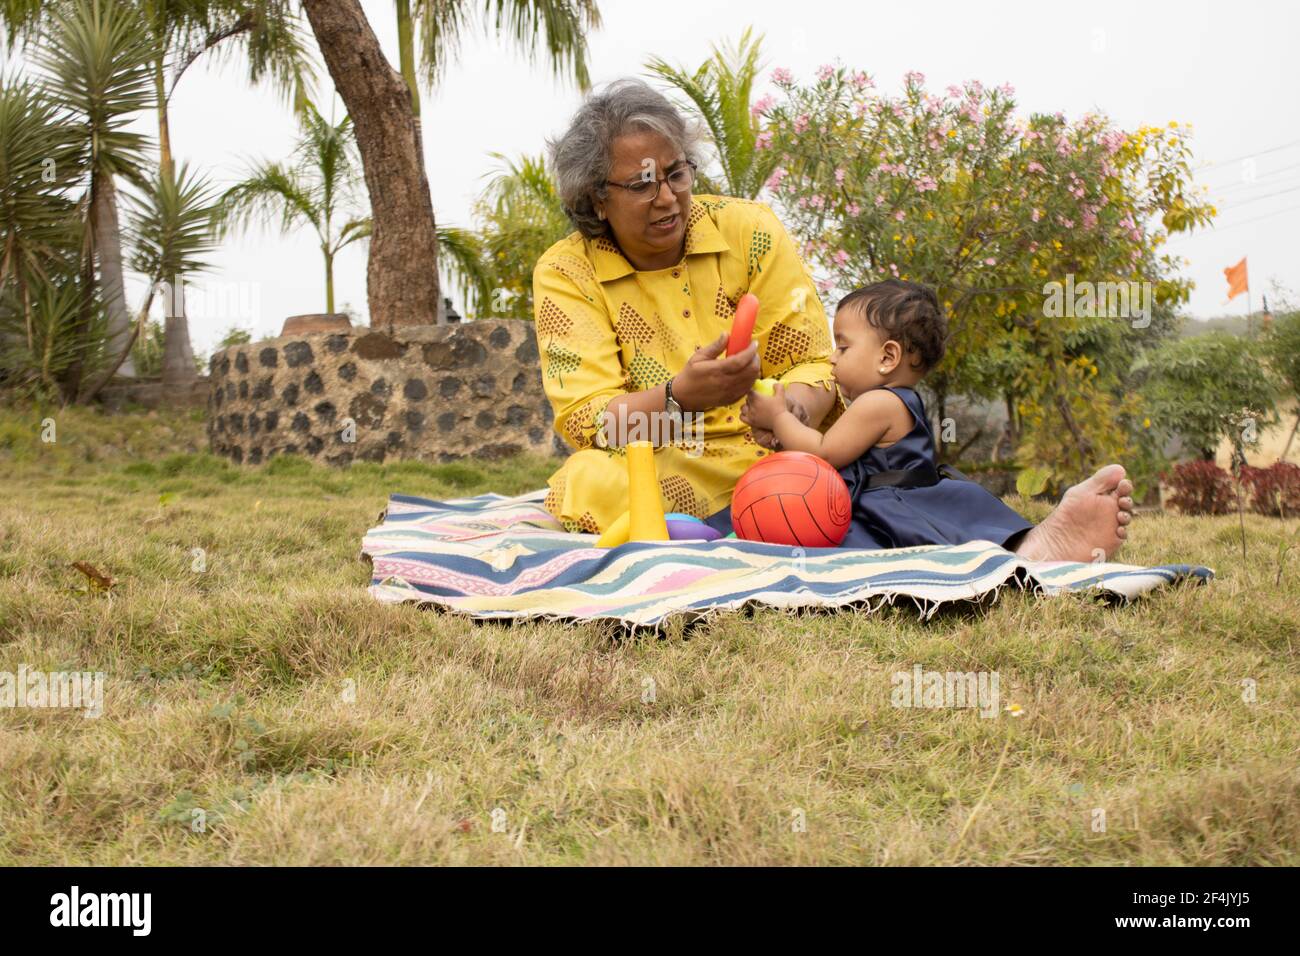 Happy moments with grandma, indian or asian senior lady spending quality time with her grand daughter in garden. Stock Photo